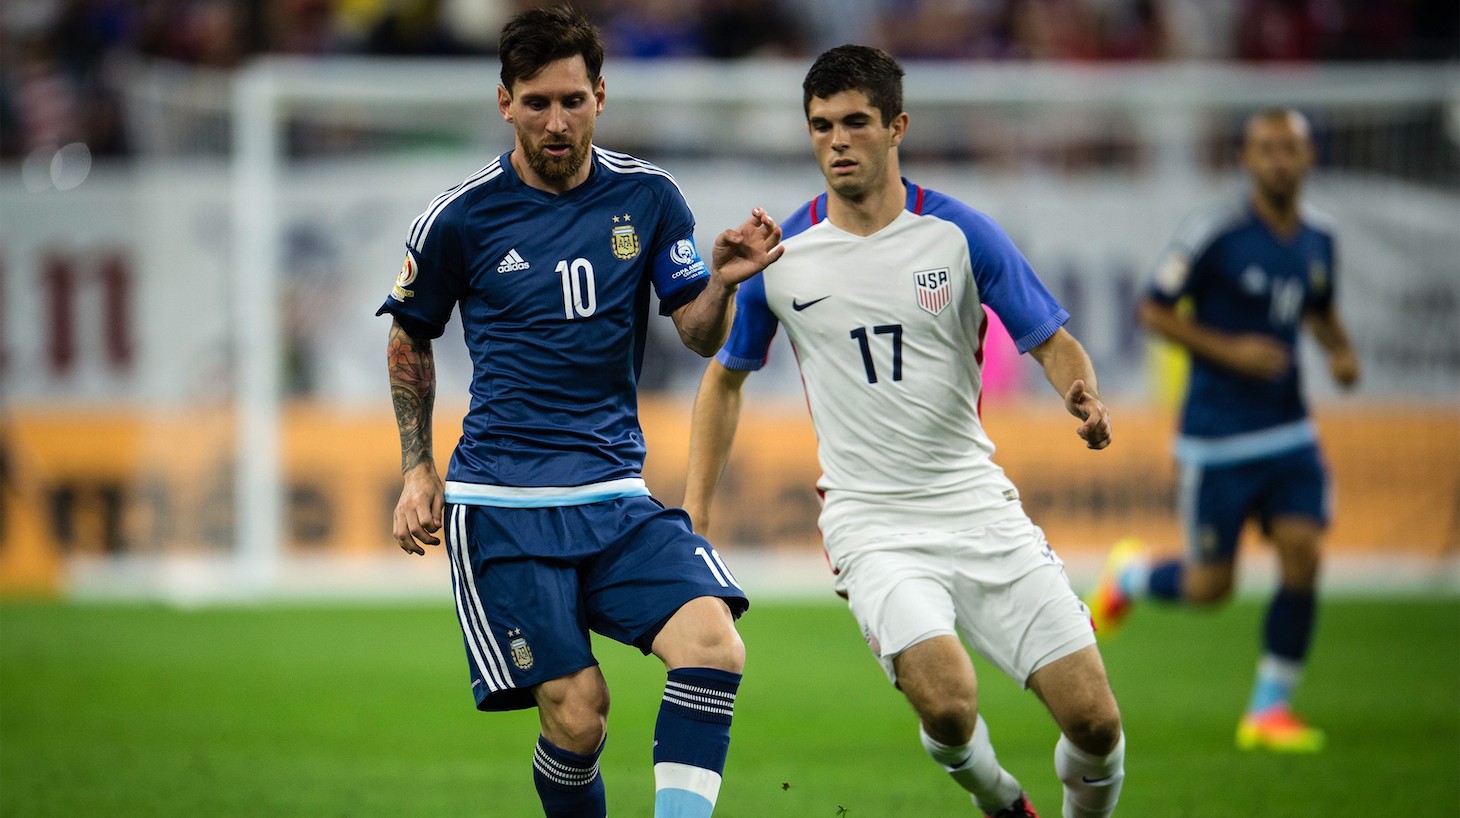 Christian Pulisic (R) of USA struggle for the ball against Lionel Messi (L) of Argentina during the 2016 Copa America Centenario Semi-final match between USA vs Argentina at the NRG Stadium on June 21, 2016 in Houston, USA.